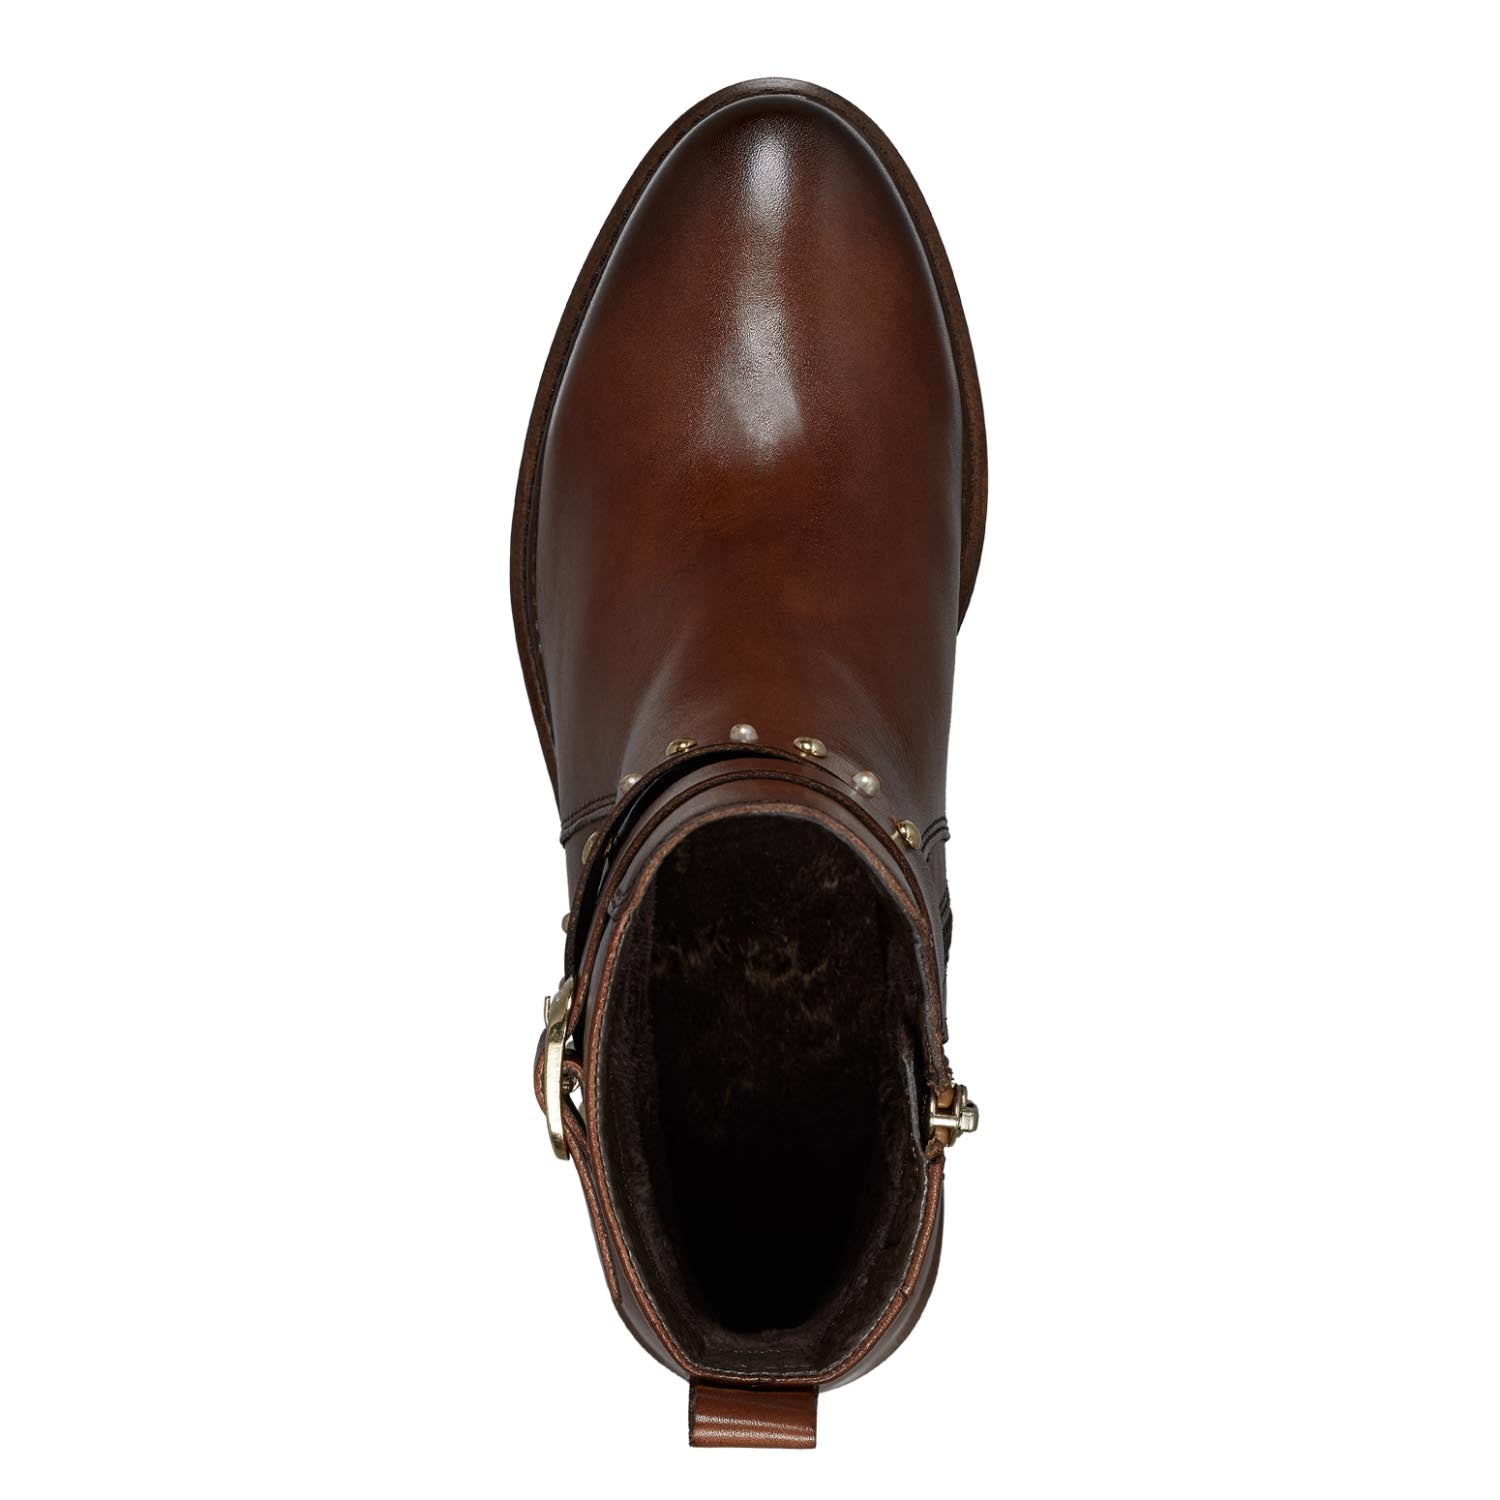 Overhead view of the Tamaris ankle boot.